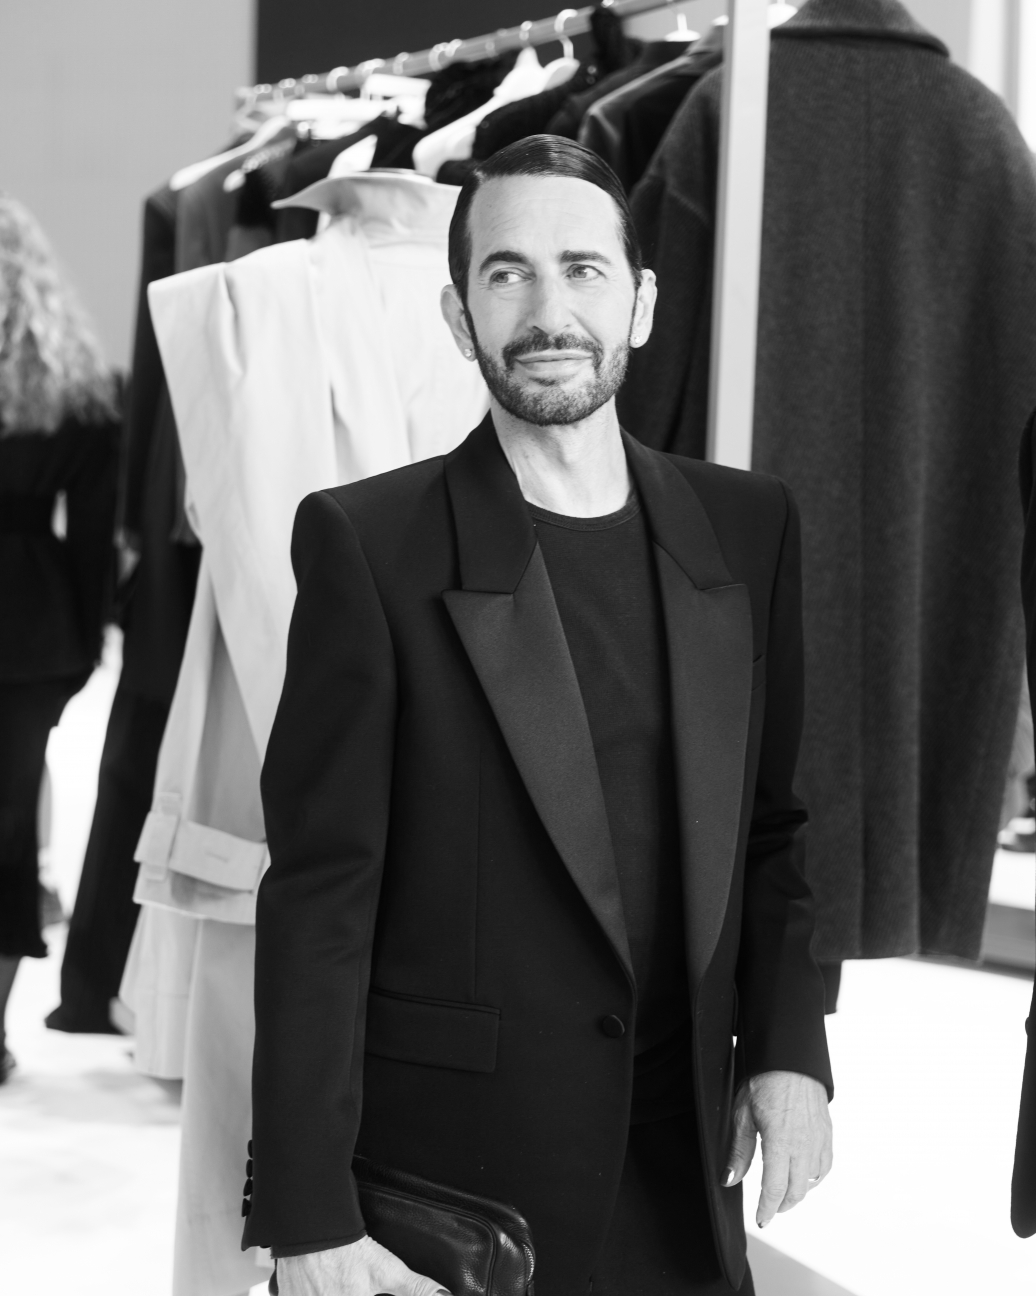 2014 LVMH Prize for Young Fashion Designers Worldwide – Opportunity Desk